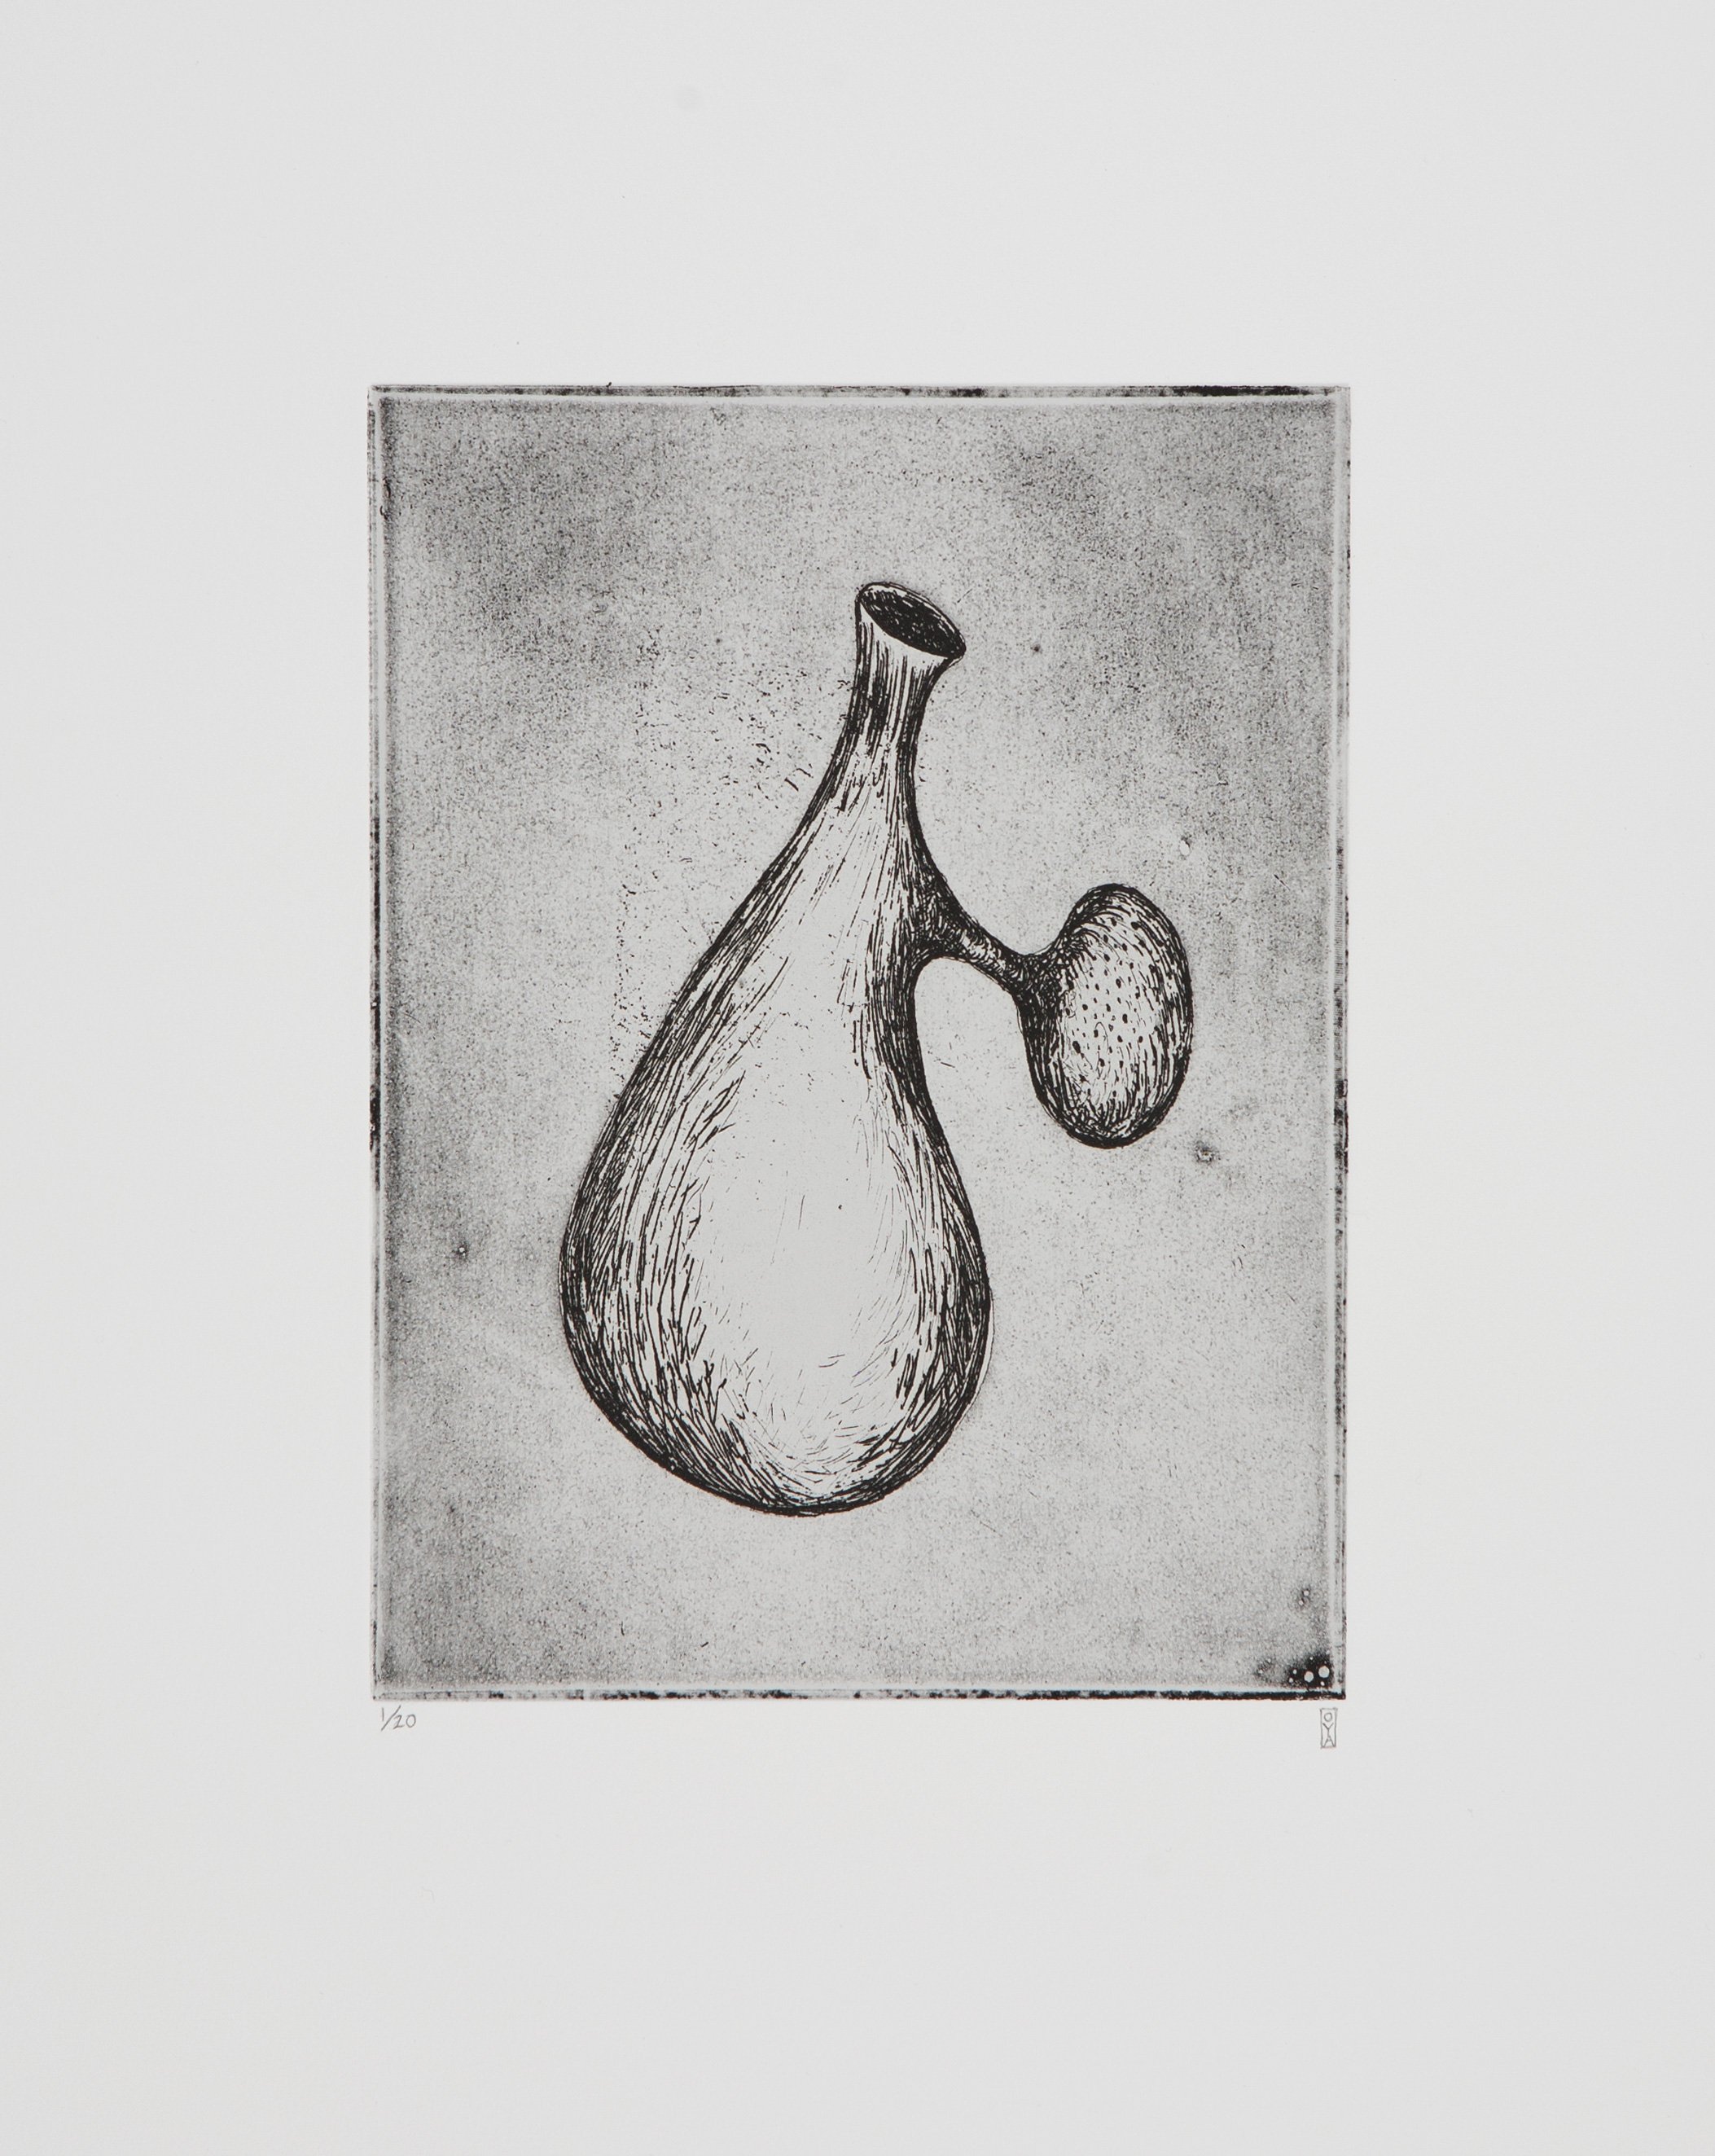    From The Book of Instant Knowledge,   2007, etching, limited, varied edition of 10 